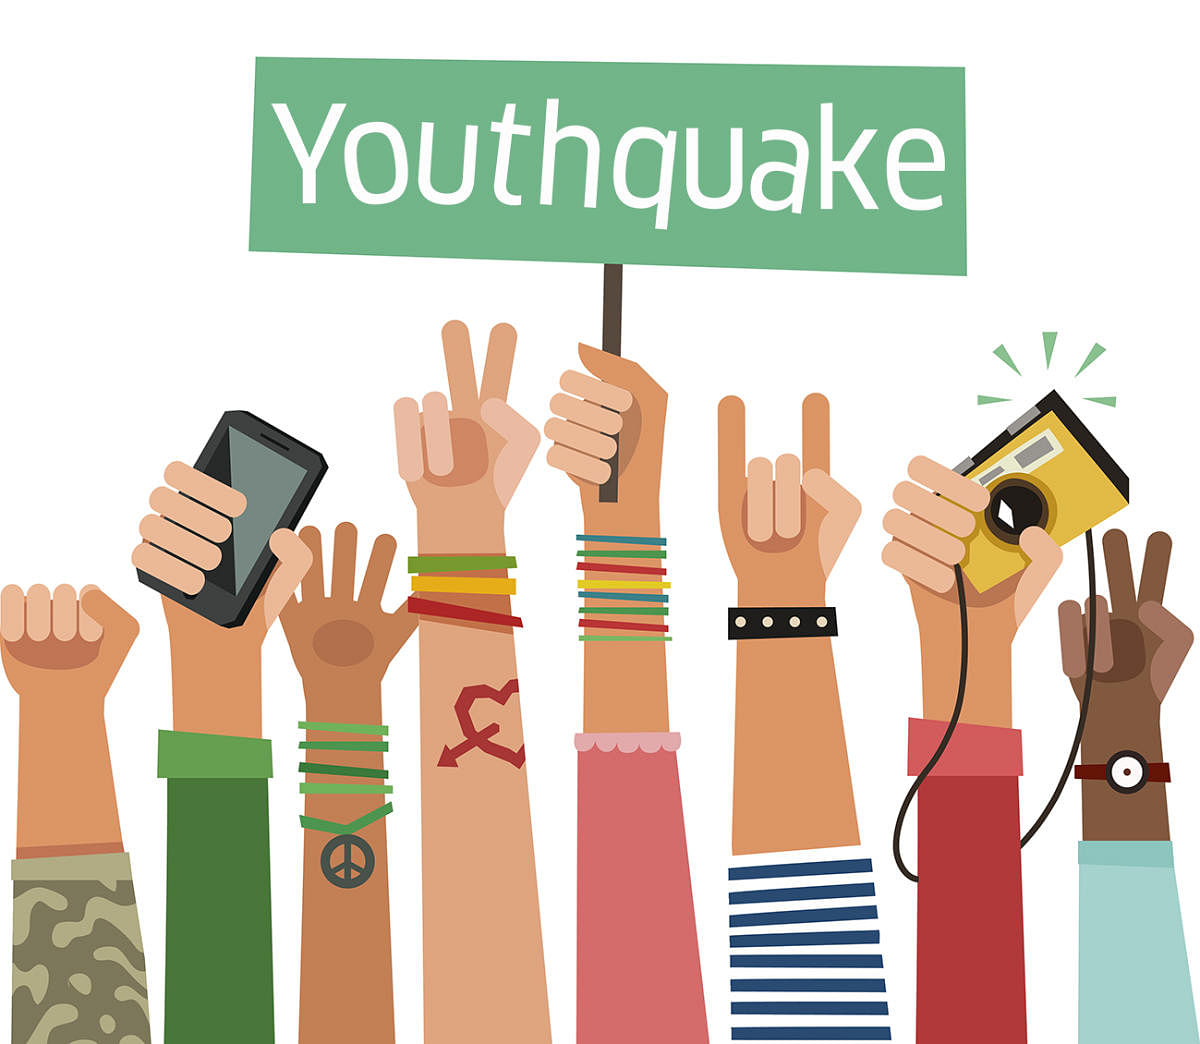 The former Vogue editor Diana Vreeland apparently coined 'youthquake' in the 1960s, to describe the youth culture of Swinging London.